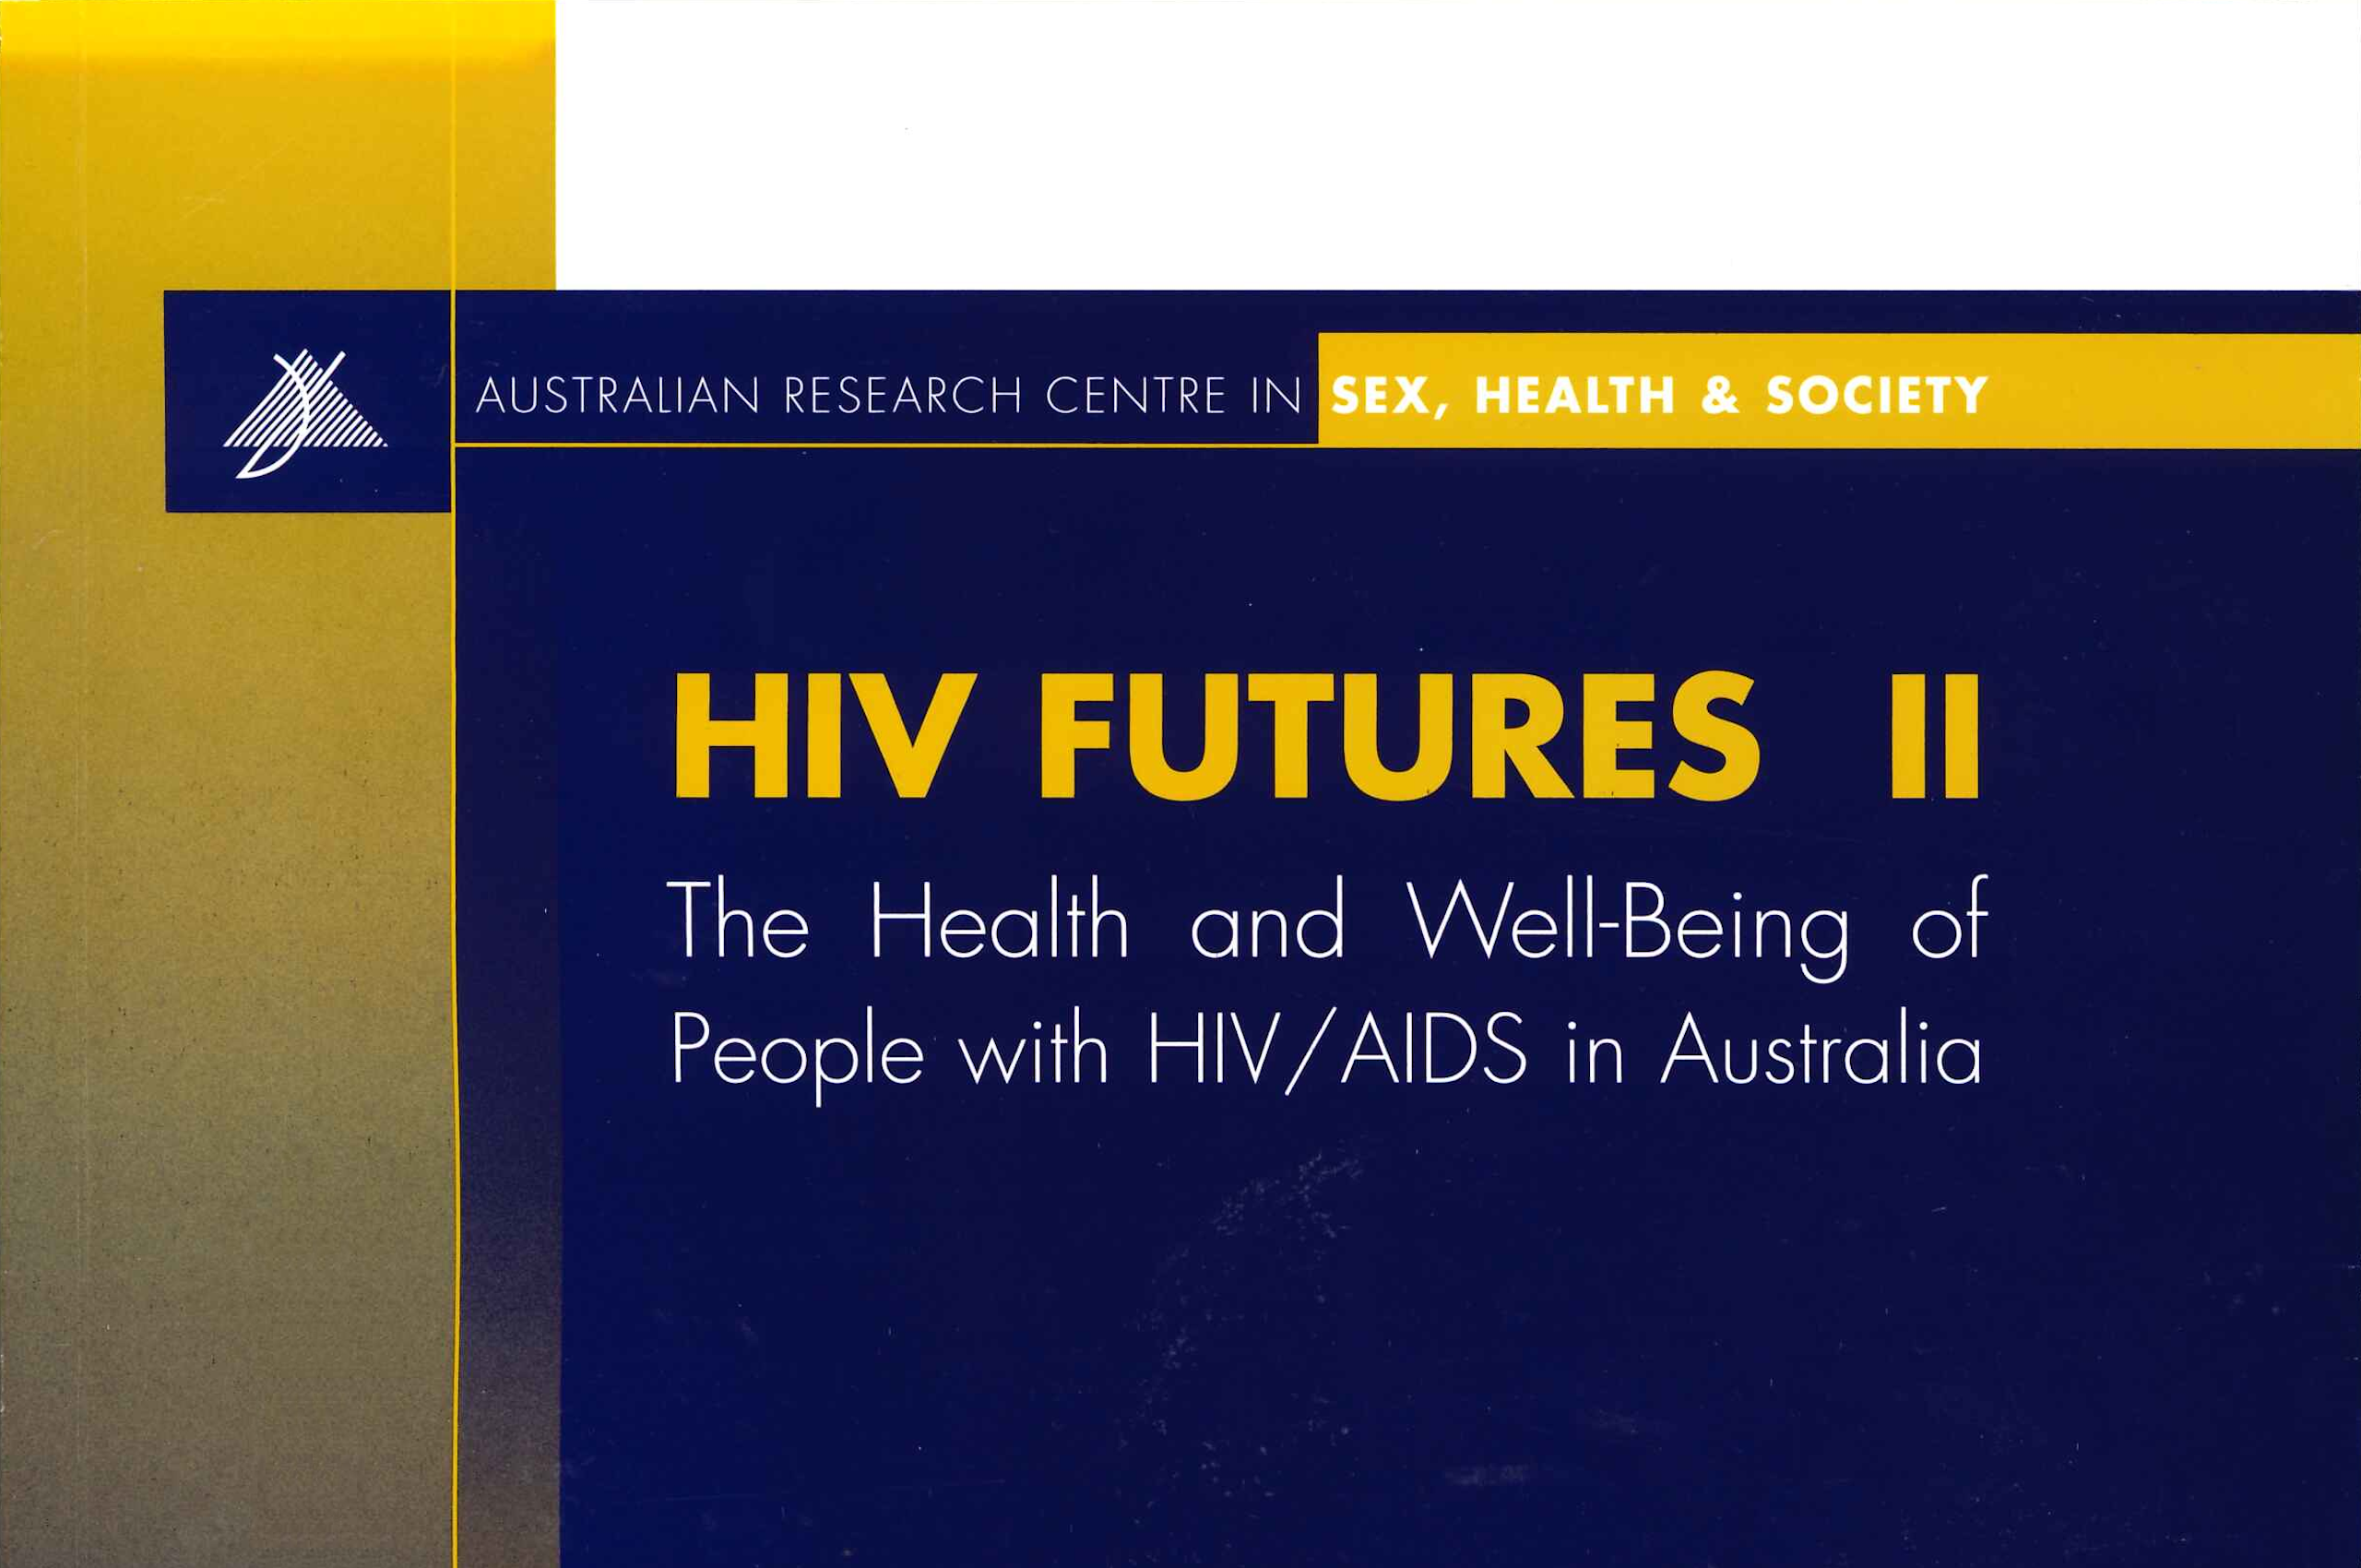 HIV Futures 2 cover with 'HIV Futures II: The Health and Well-Being of People with HIV/AIDS in Australia' and ARCSHS logo 